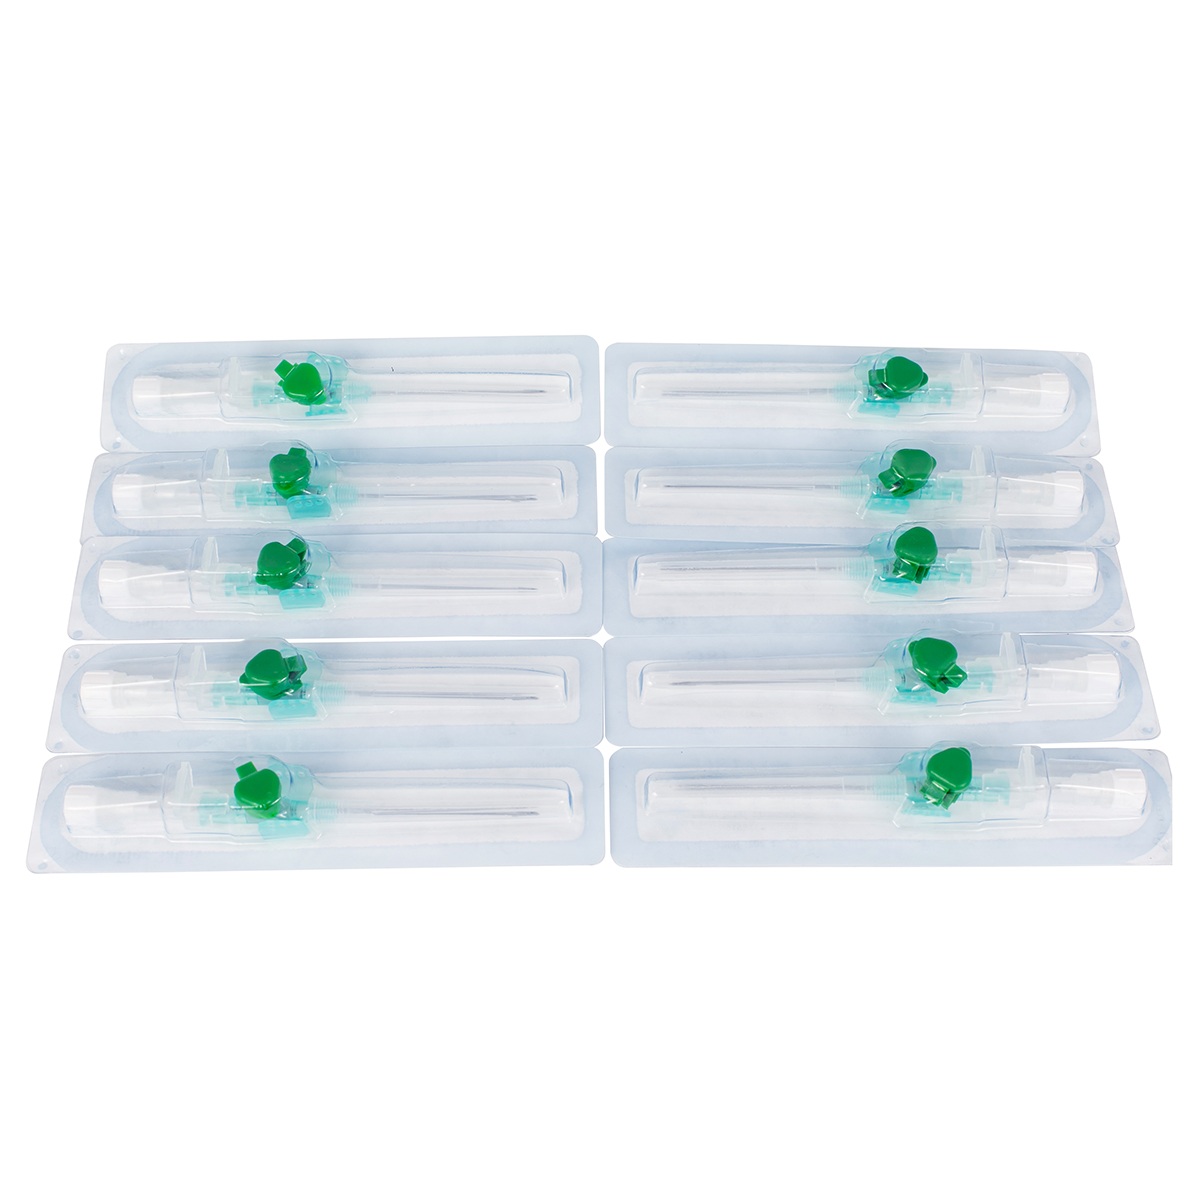 Pack of 10 18g Ported Safety Cannula